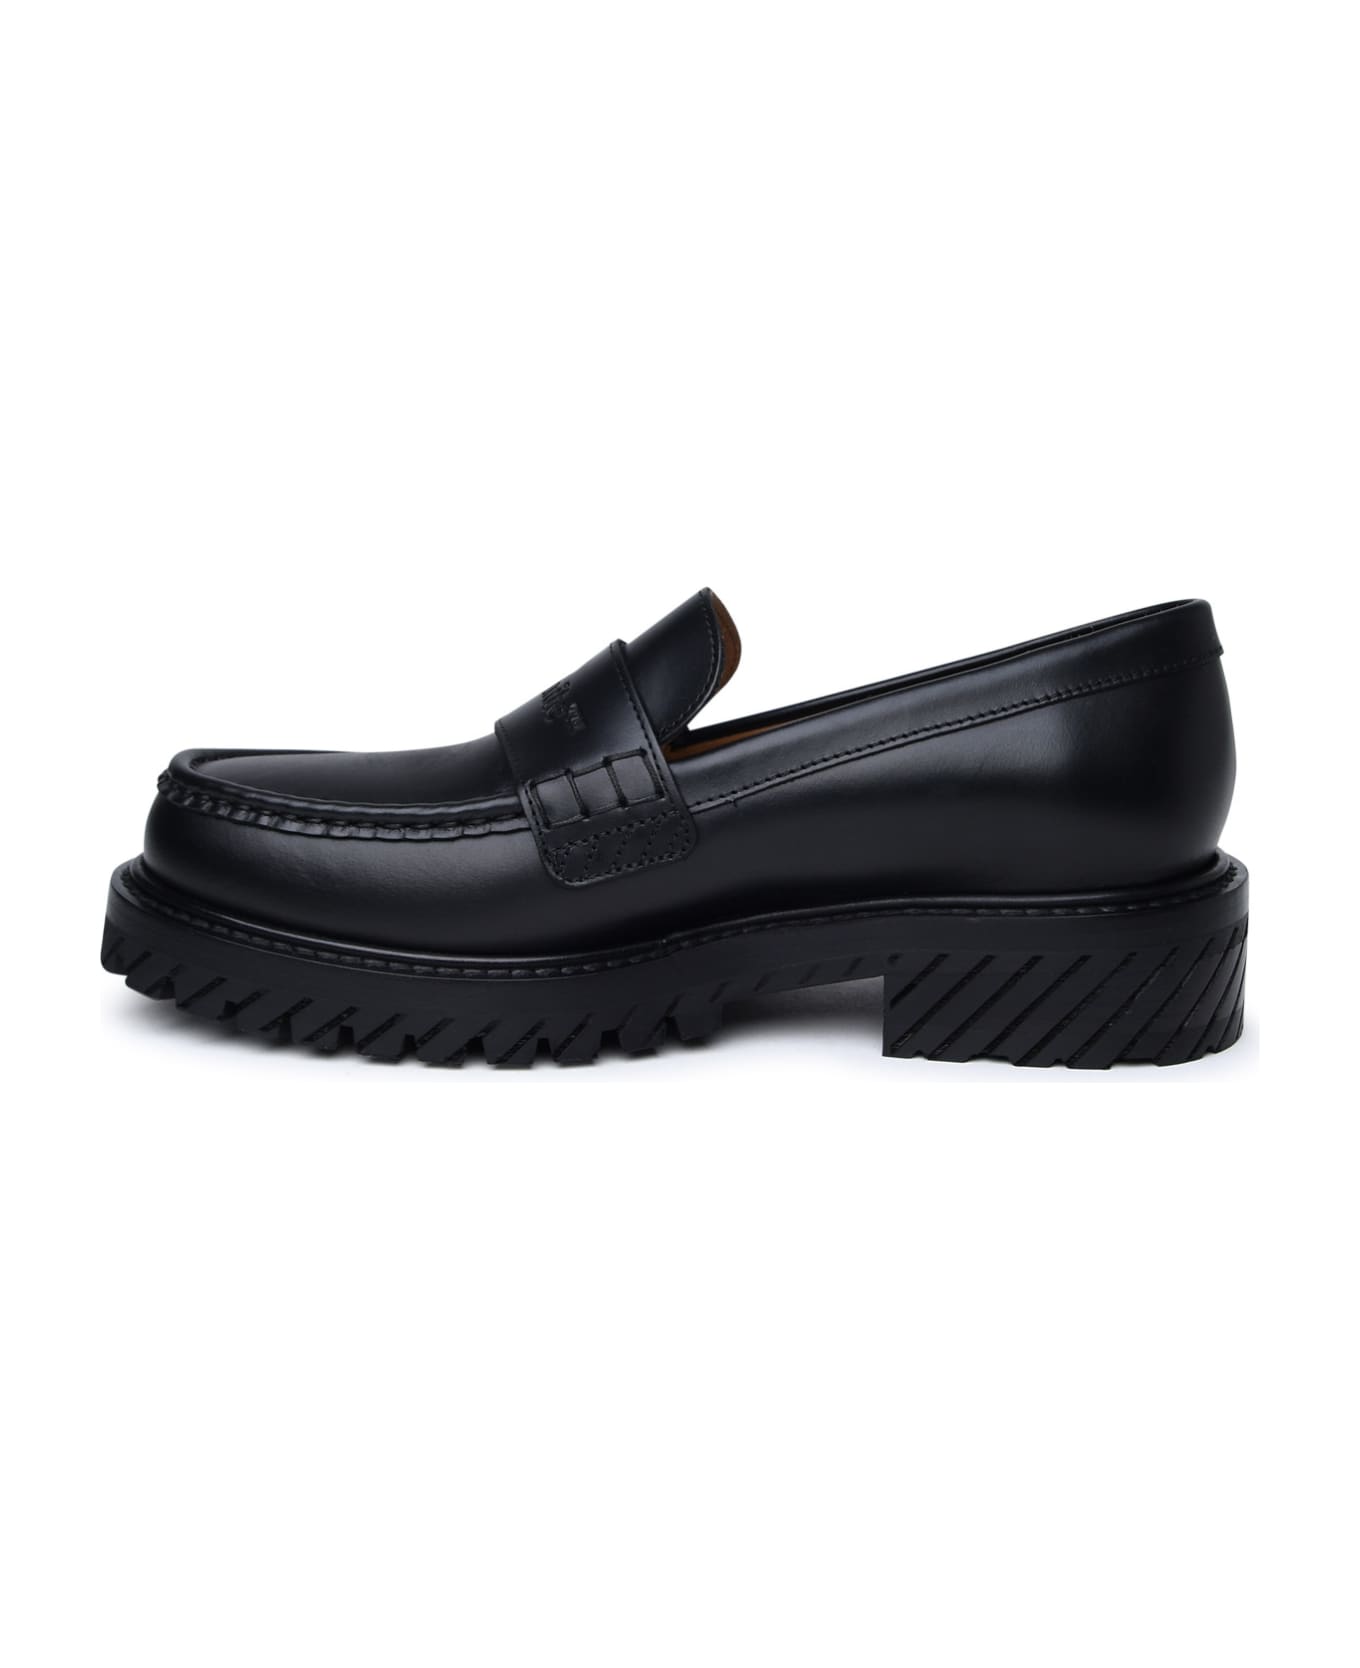 Off-White Leather Loafers - Black フラットシューズ